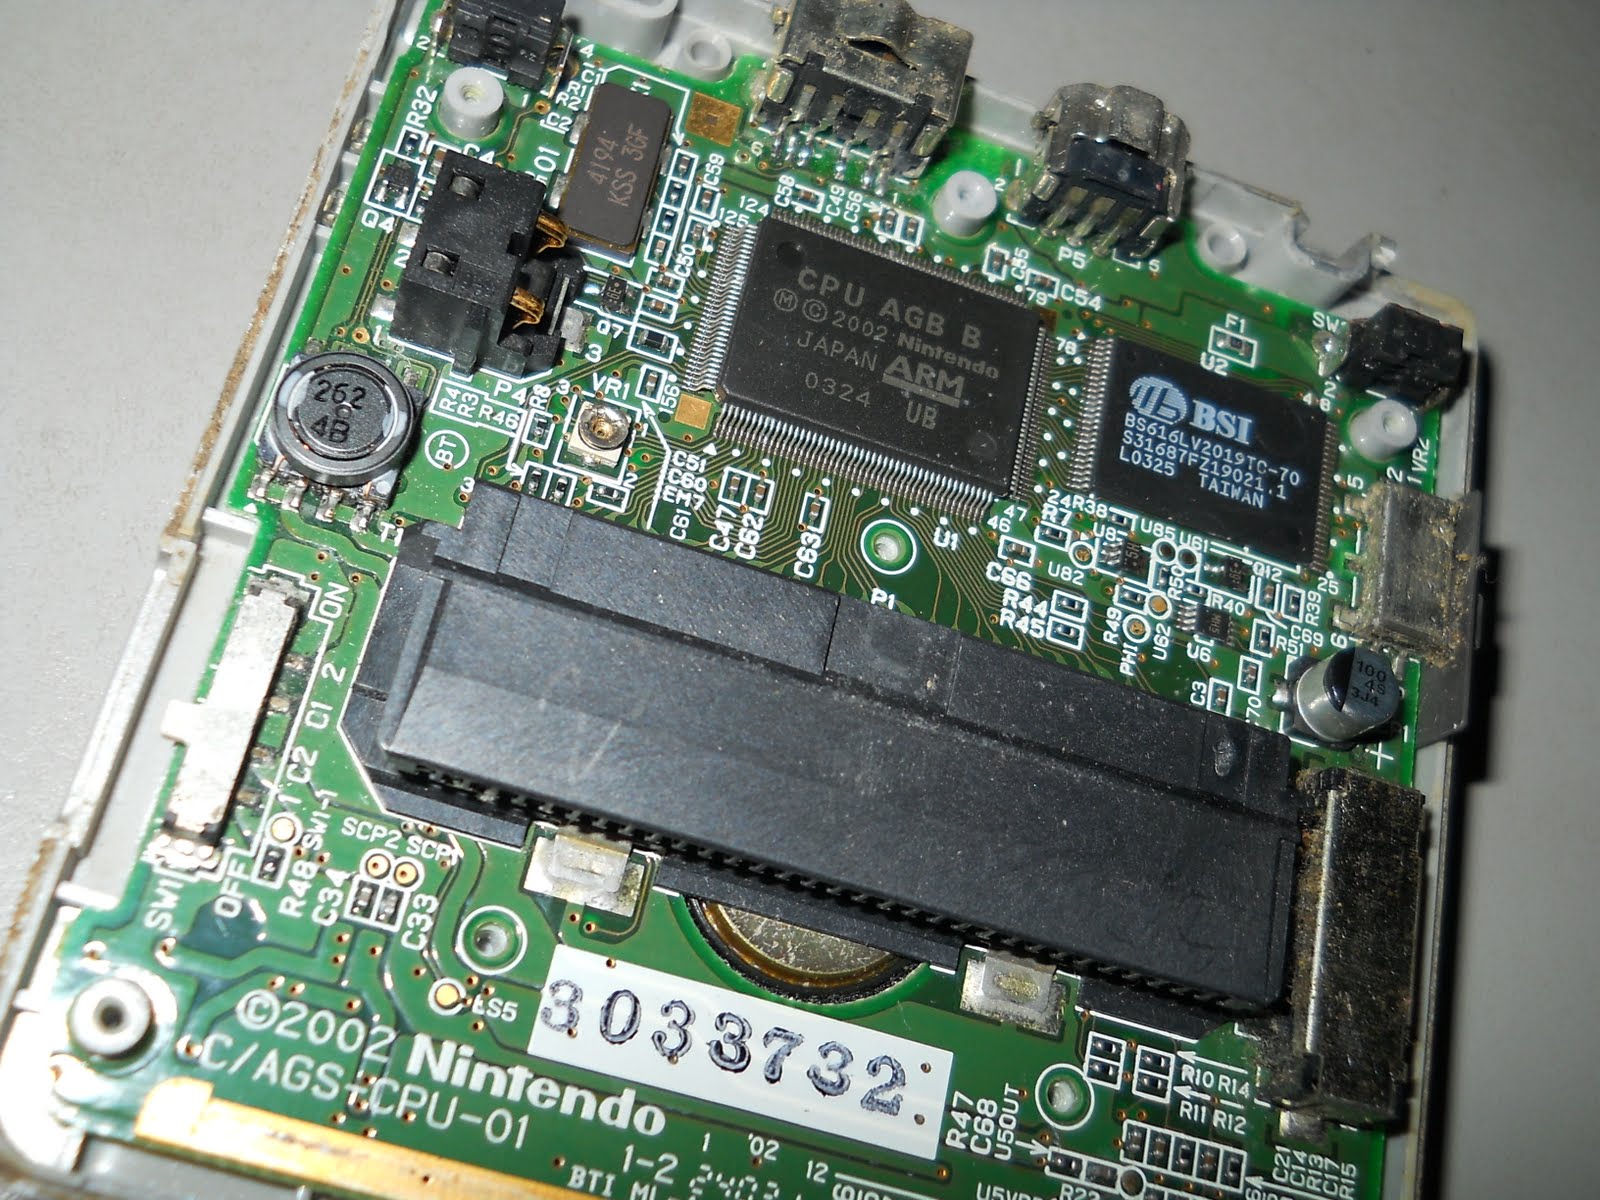 Tiger's Sharing: What's inside a Gameboy advance SP?